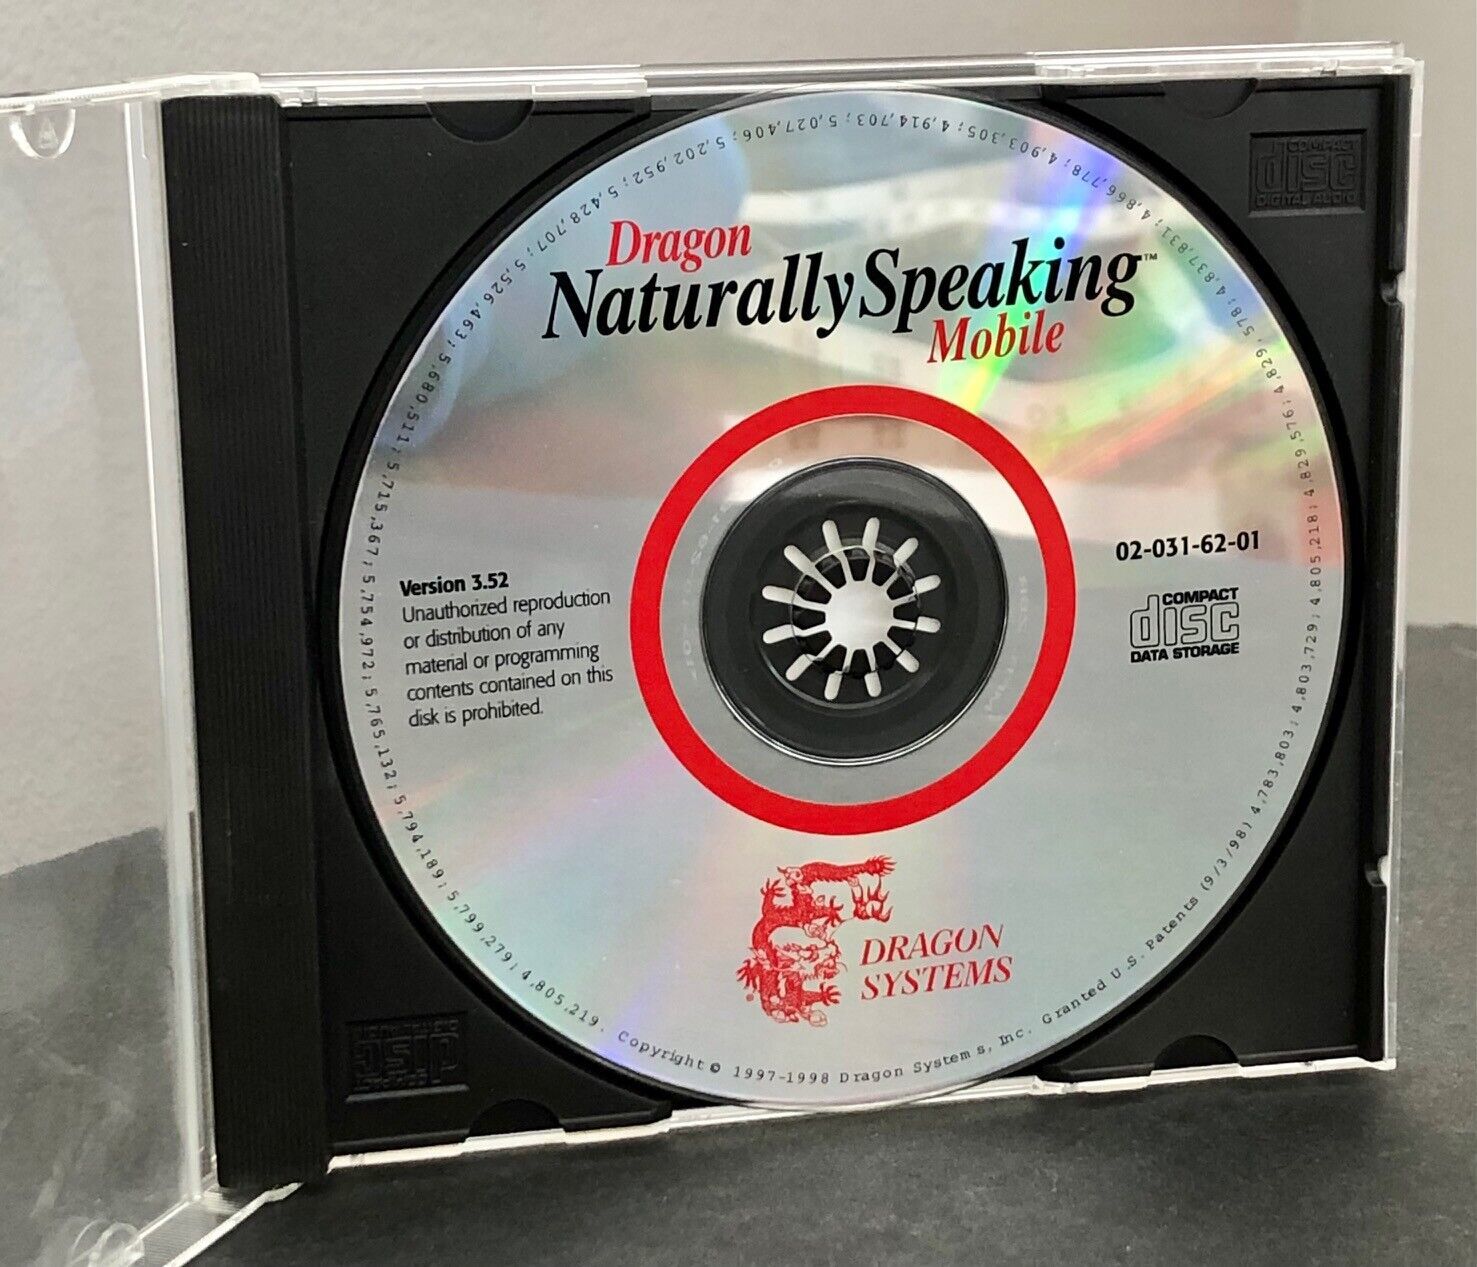 Dragon Naturally Speaking Mobile Preferred Version 3.52 Software + Product Key - $6.99